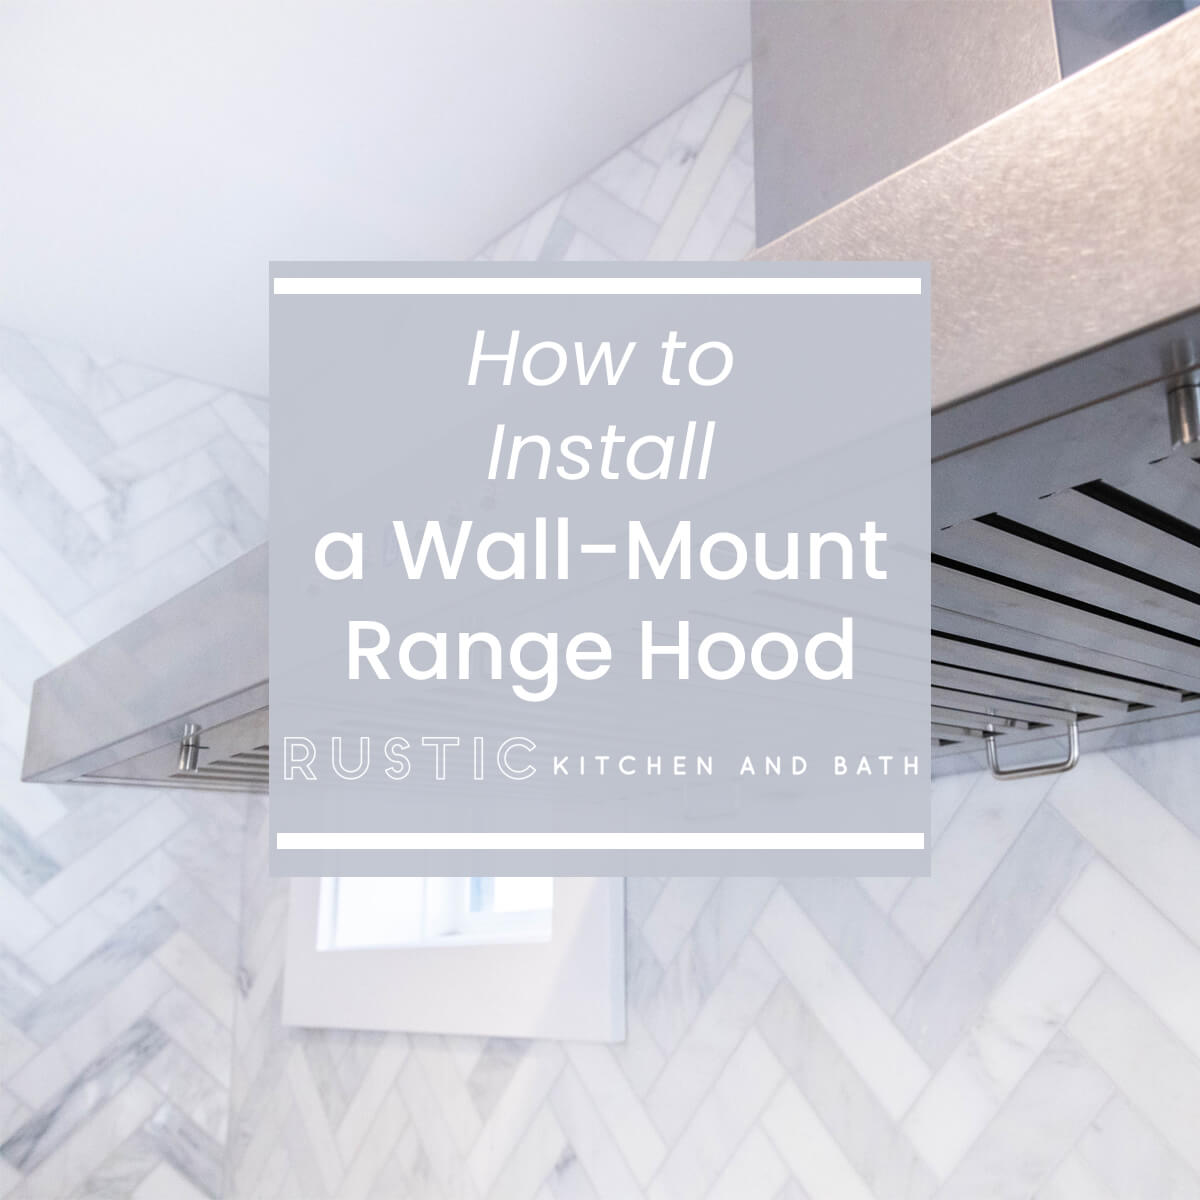 How to Install A Wall-Mount Range Hood